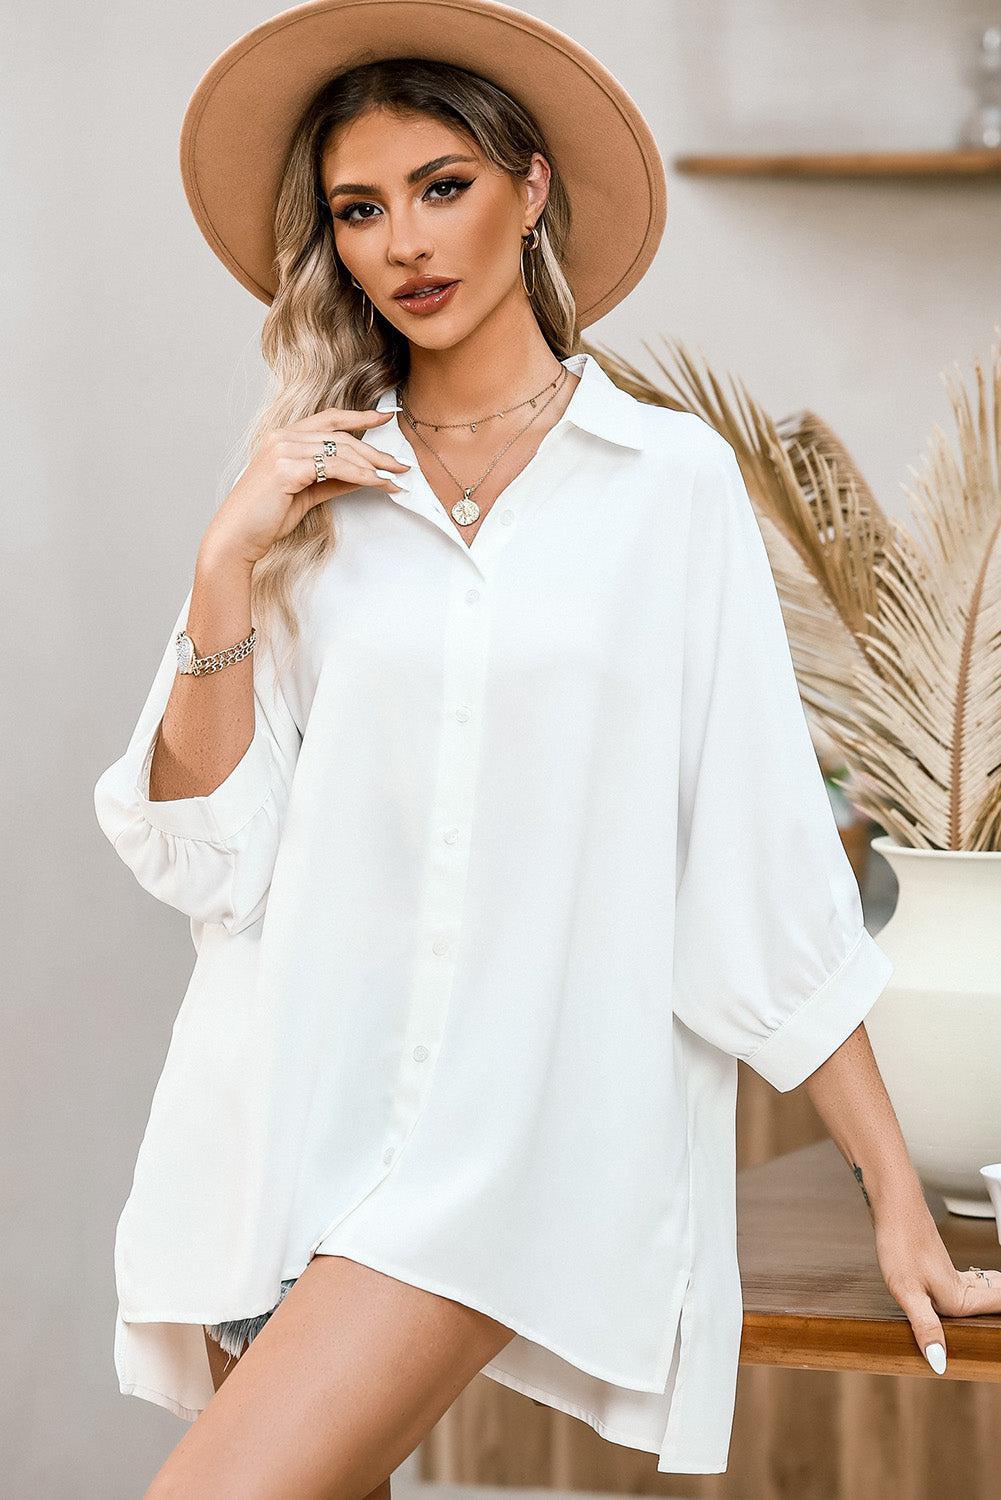 a woman wearing a hat and a white shirt